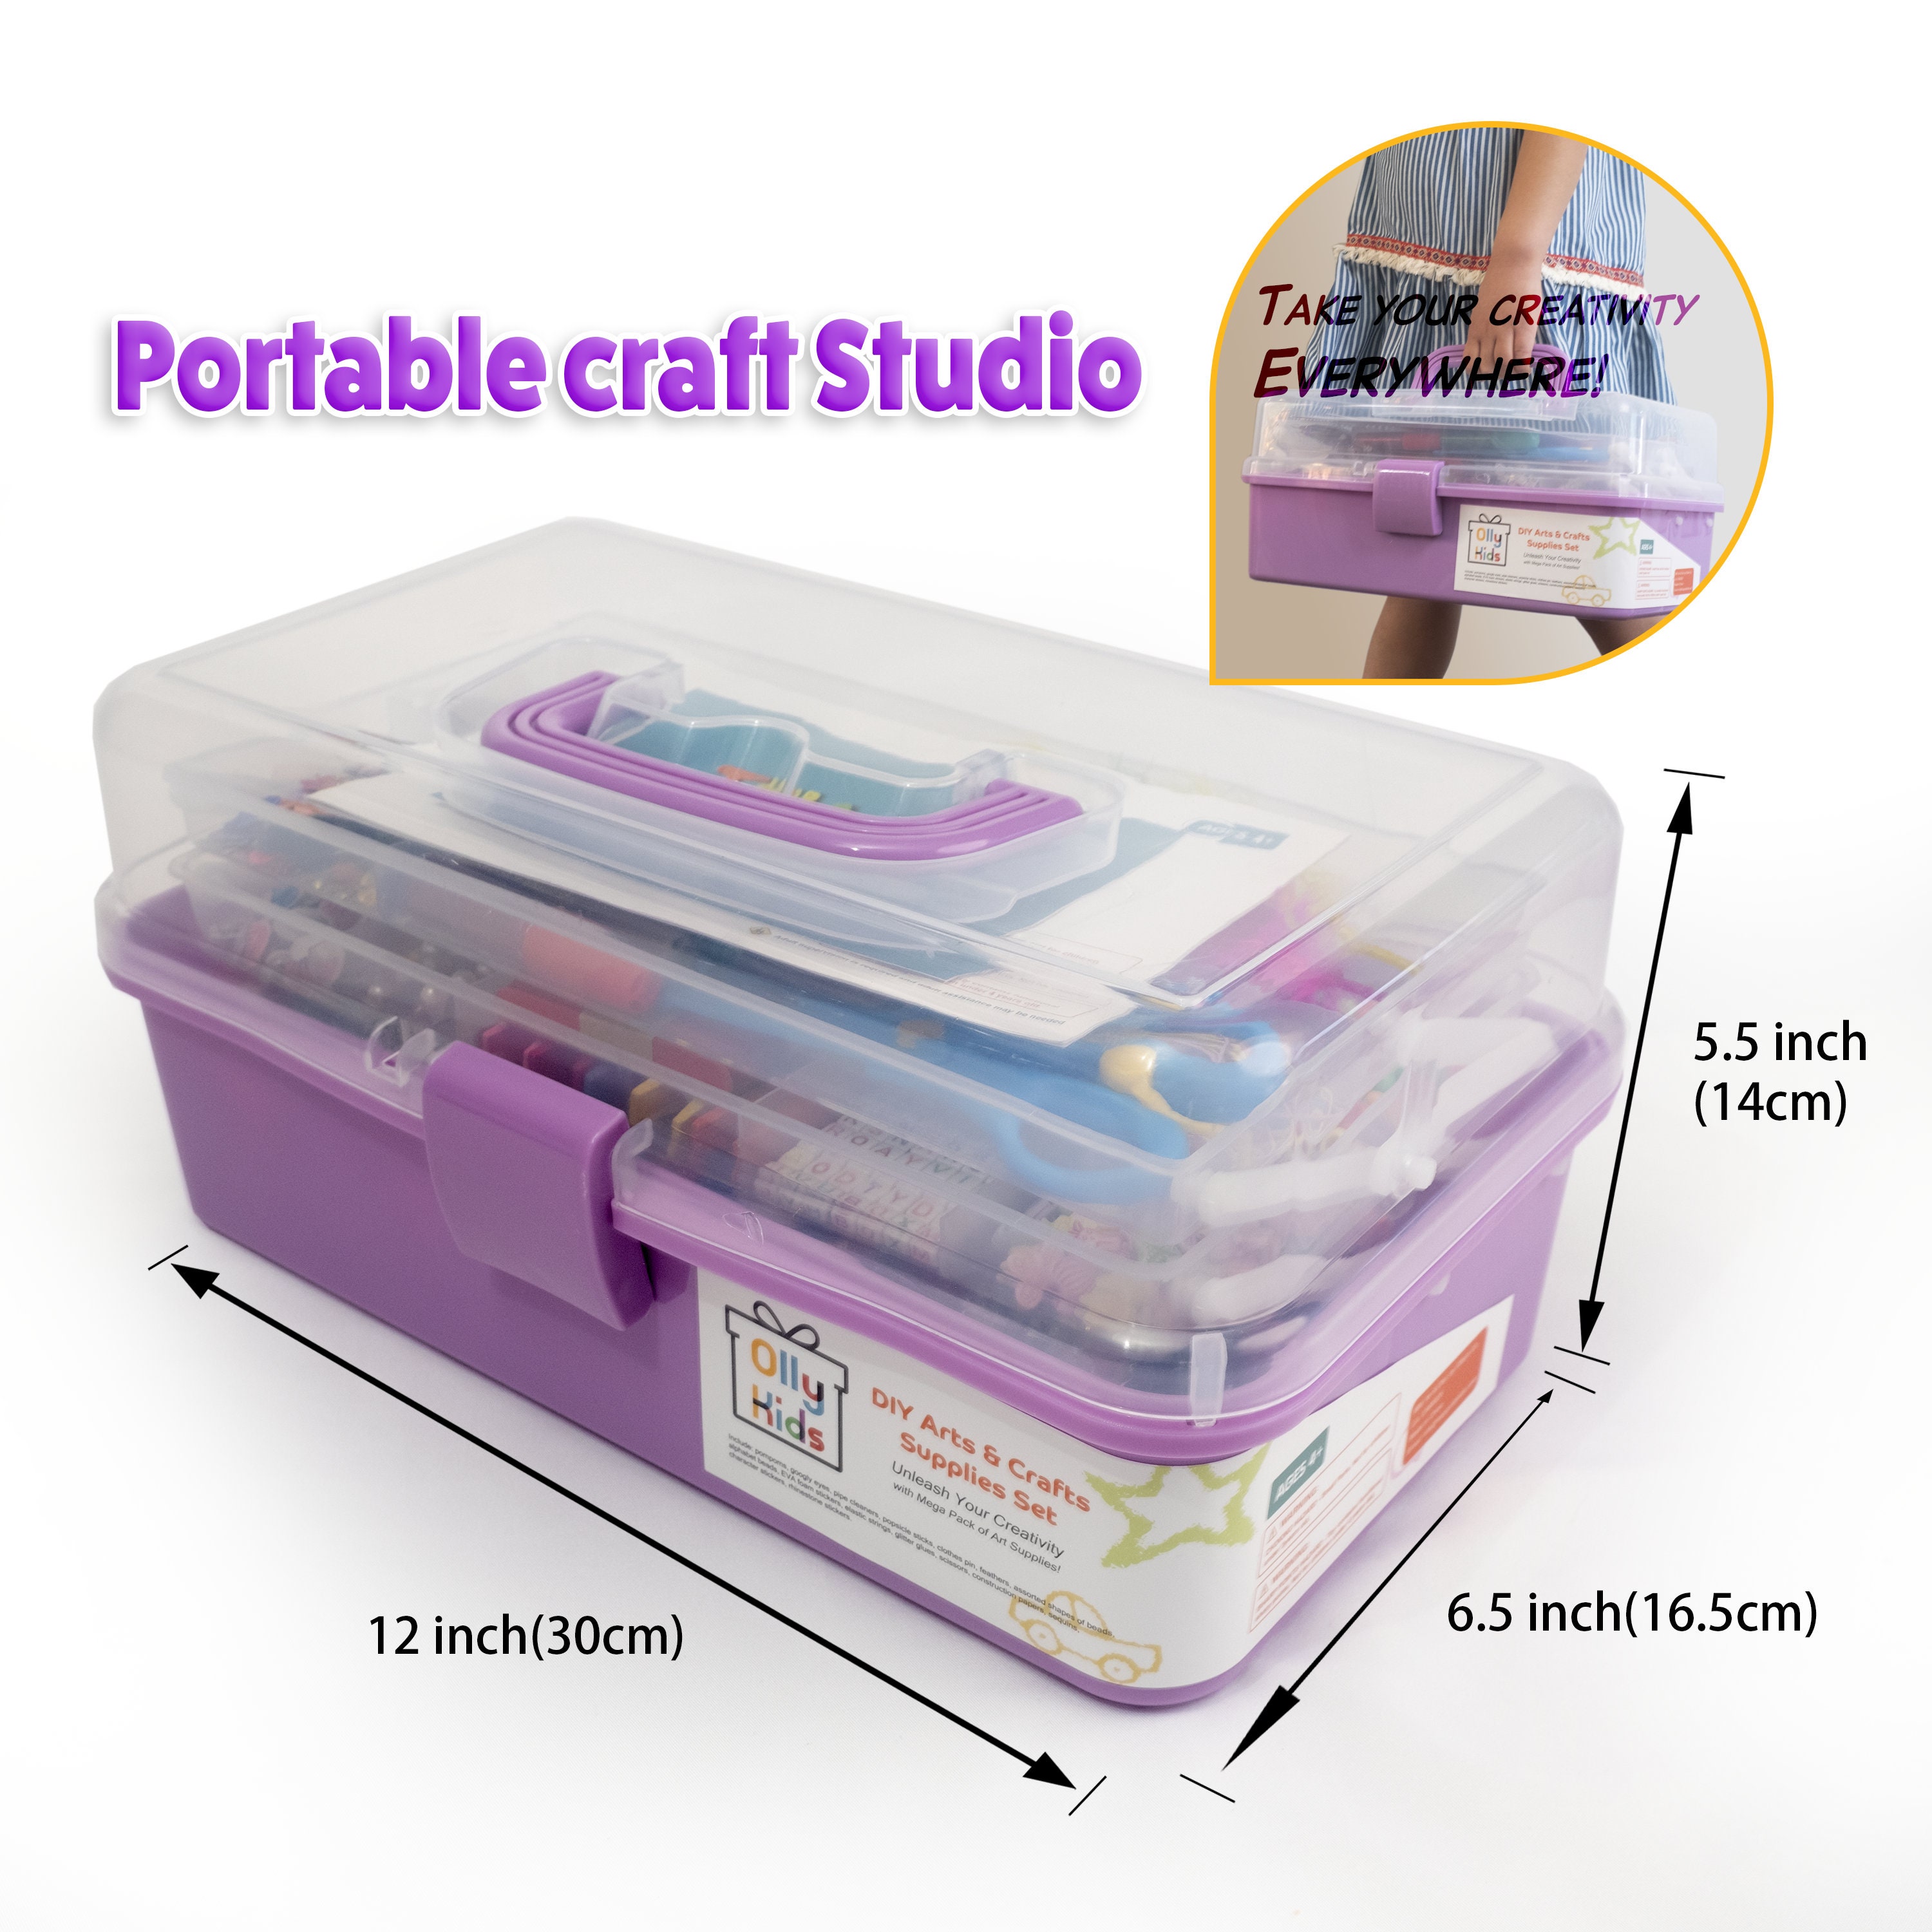 Ultimate Box of Crafts, Over 1,000 Piece Set 